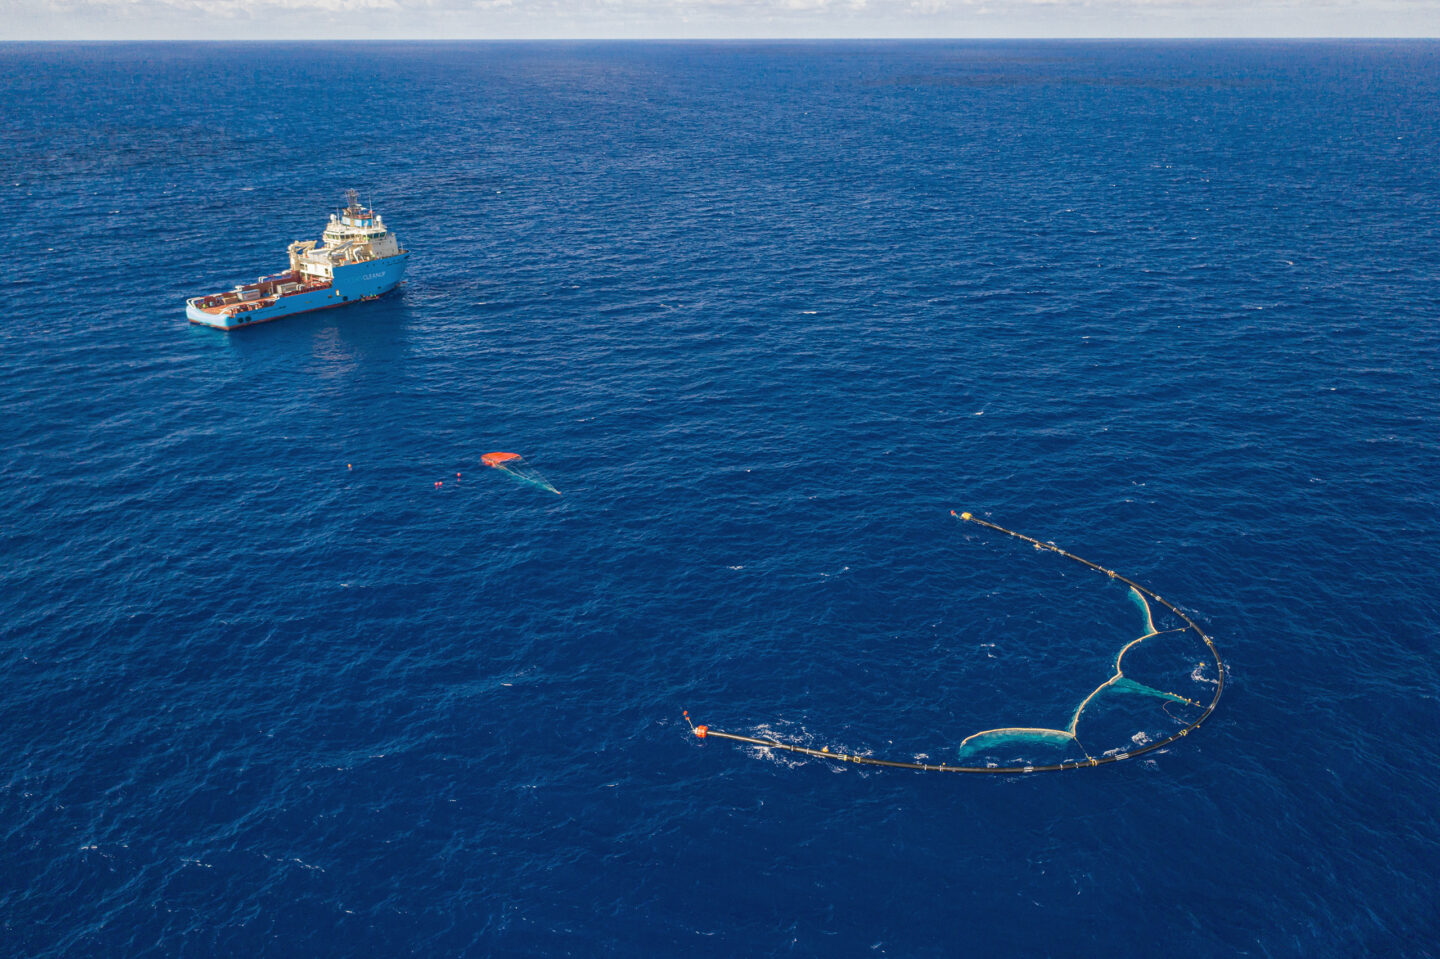 Developed by The Ocean Cleanup, this prototype boom was tested in 2019, successfully removing waste from the Great Pacific Garbage Patch (Image: The Ocean Cleanup)